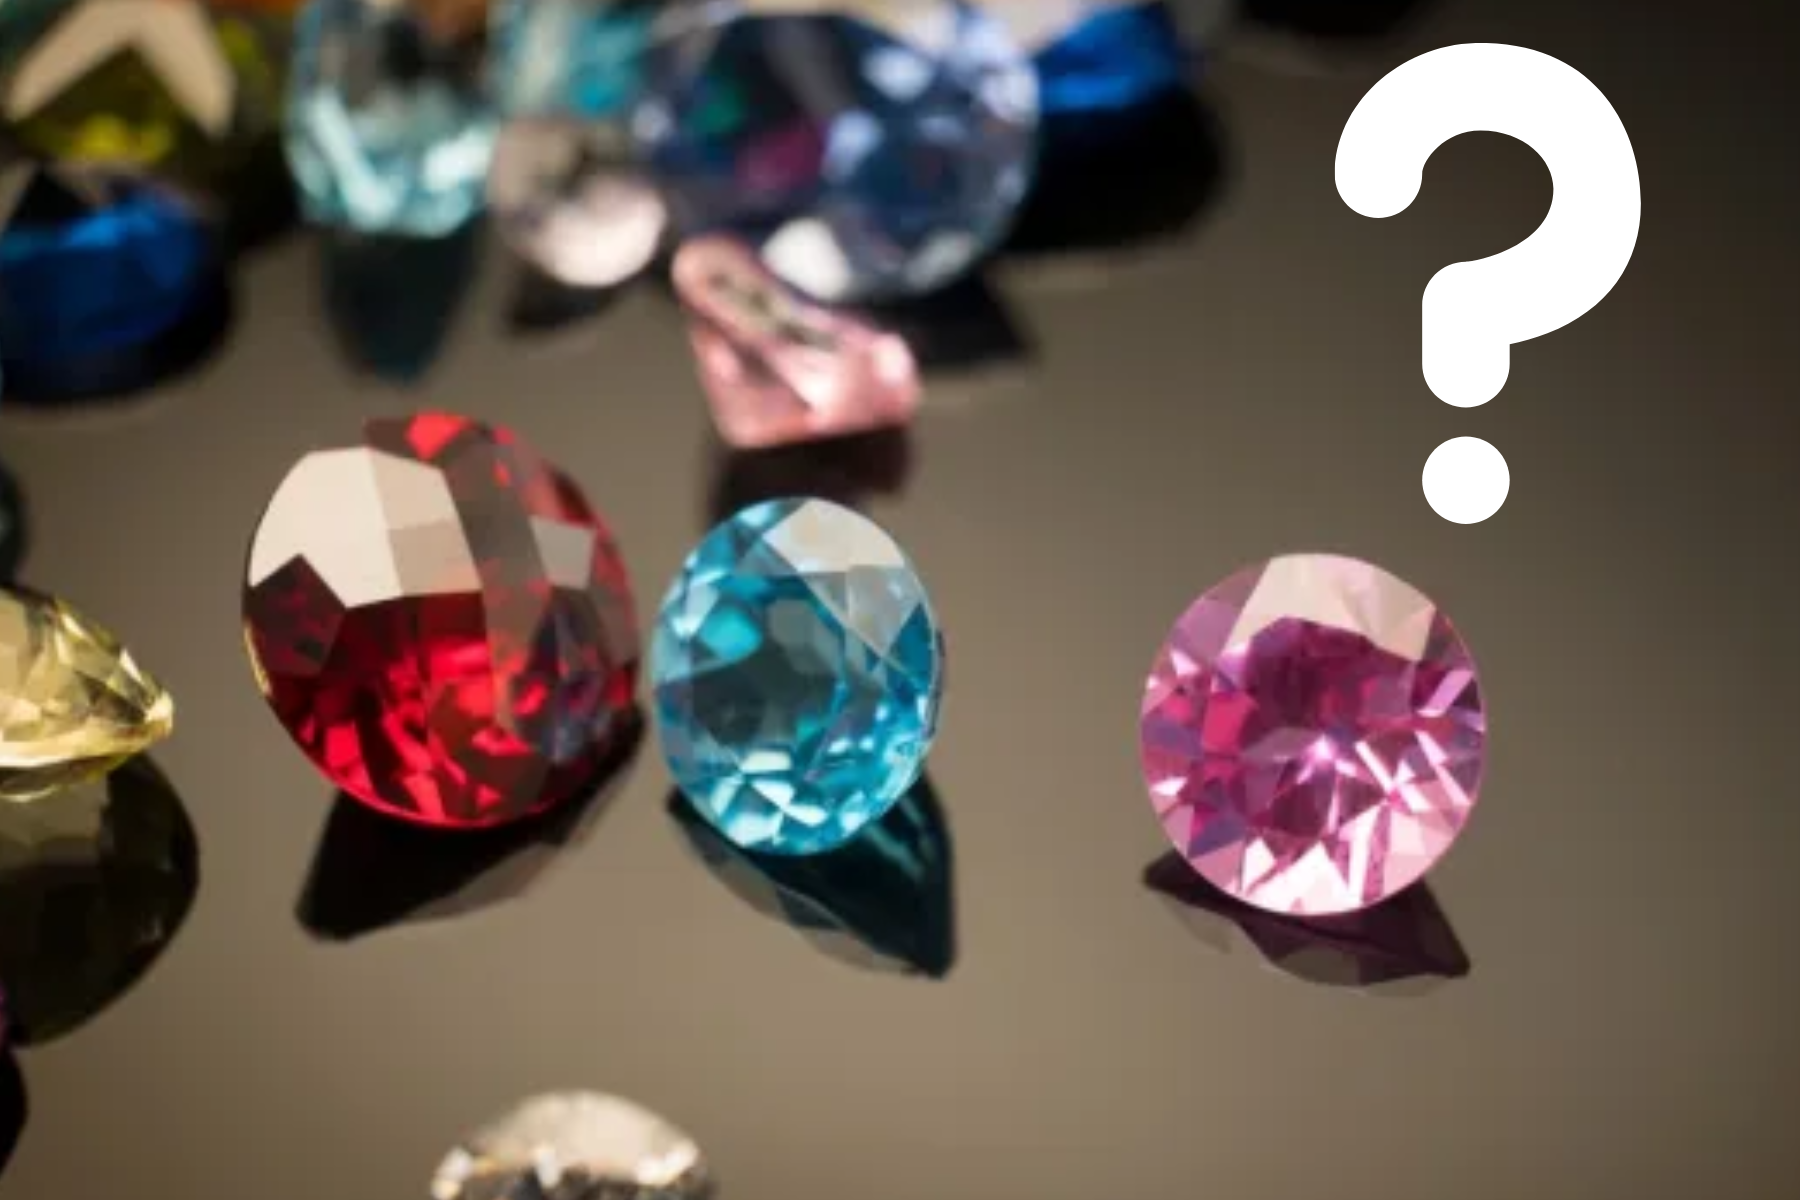 A group of colorful birthstones is arranged beside a large white question mark symbol